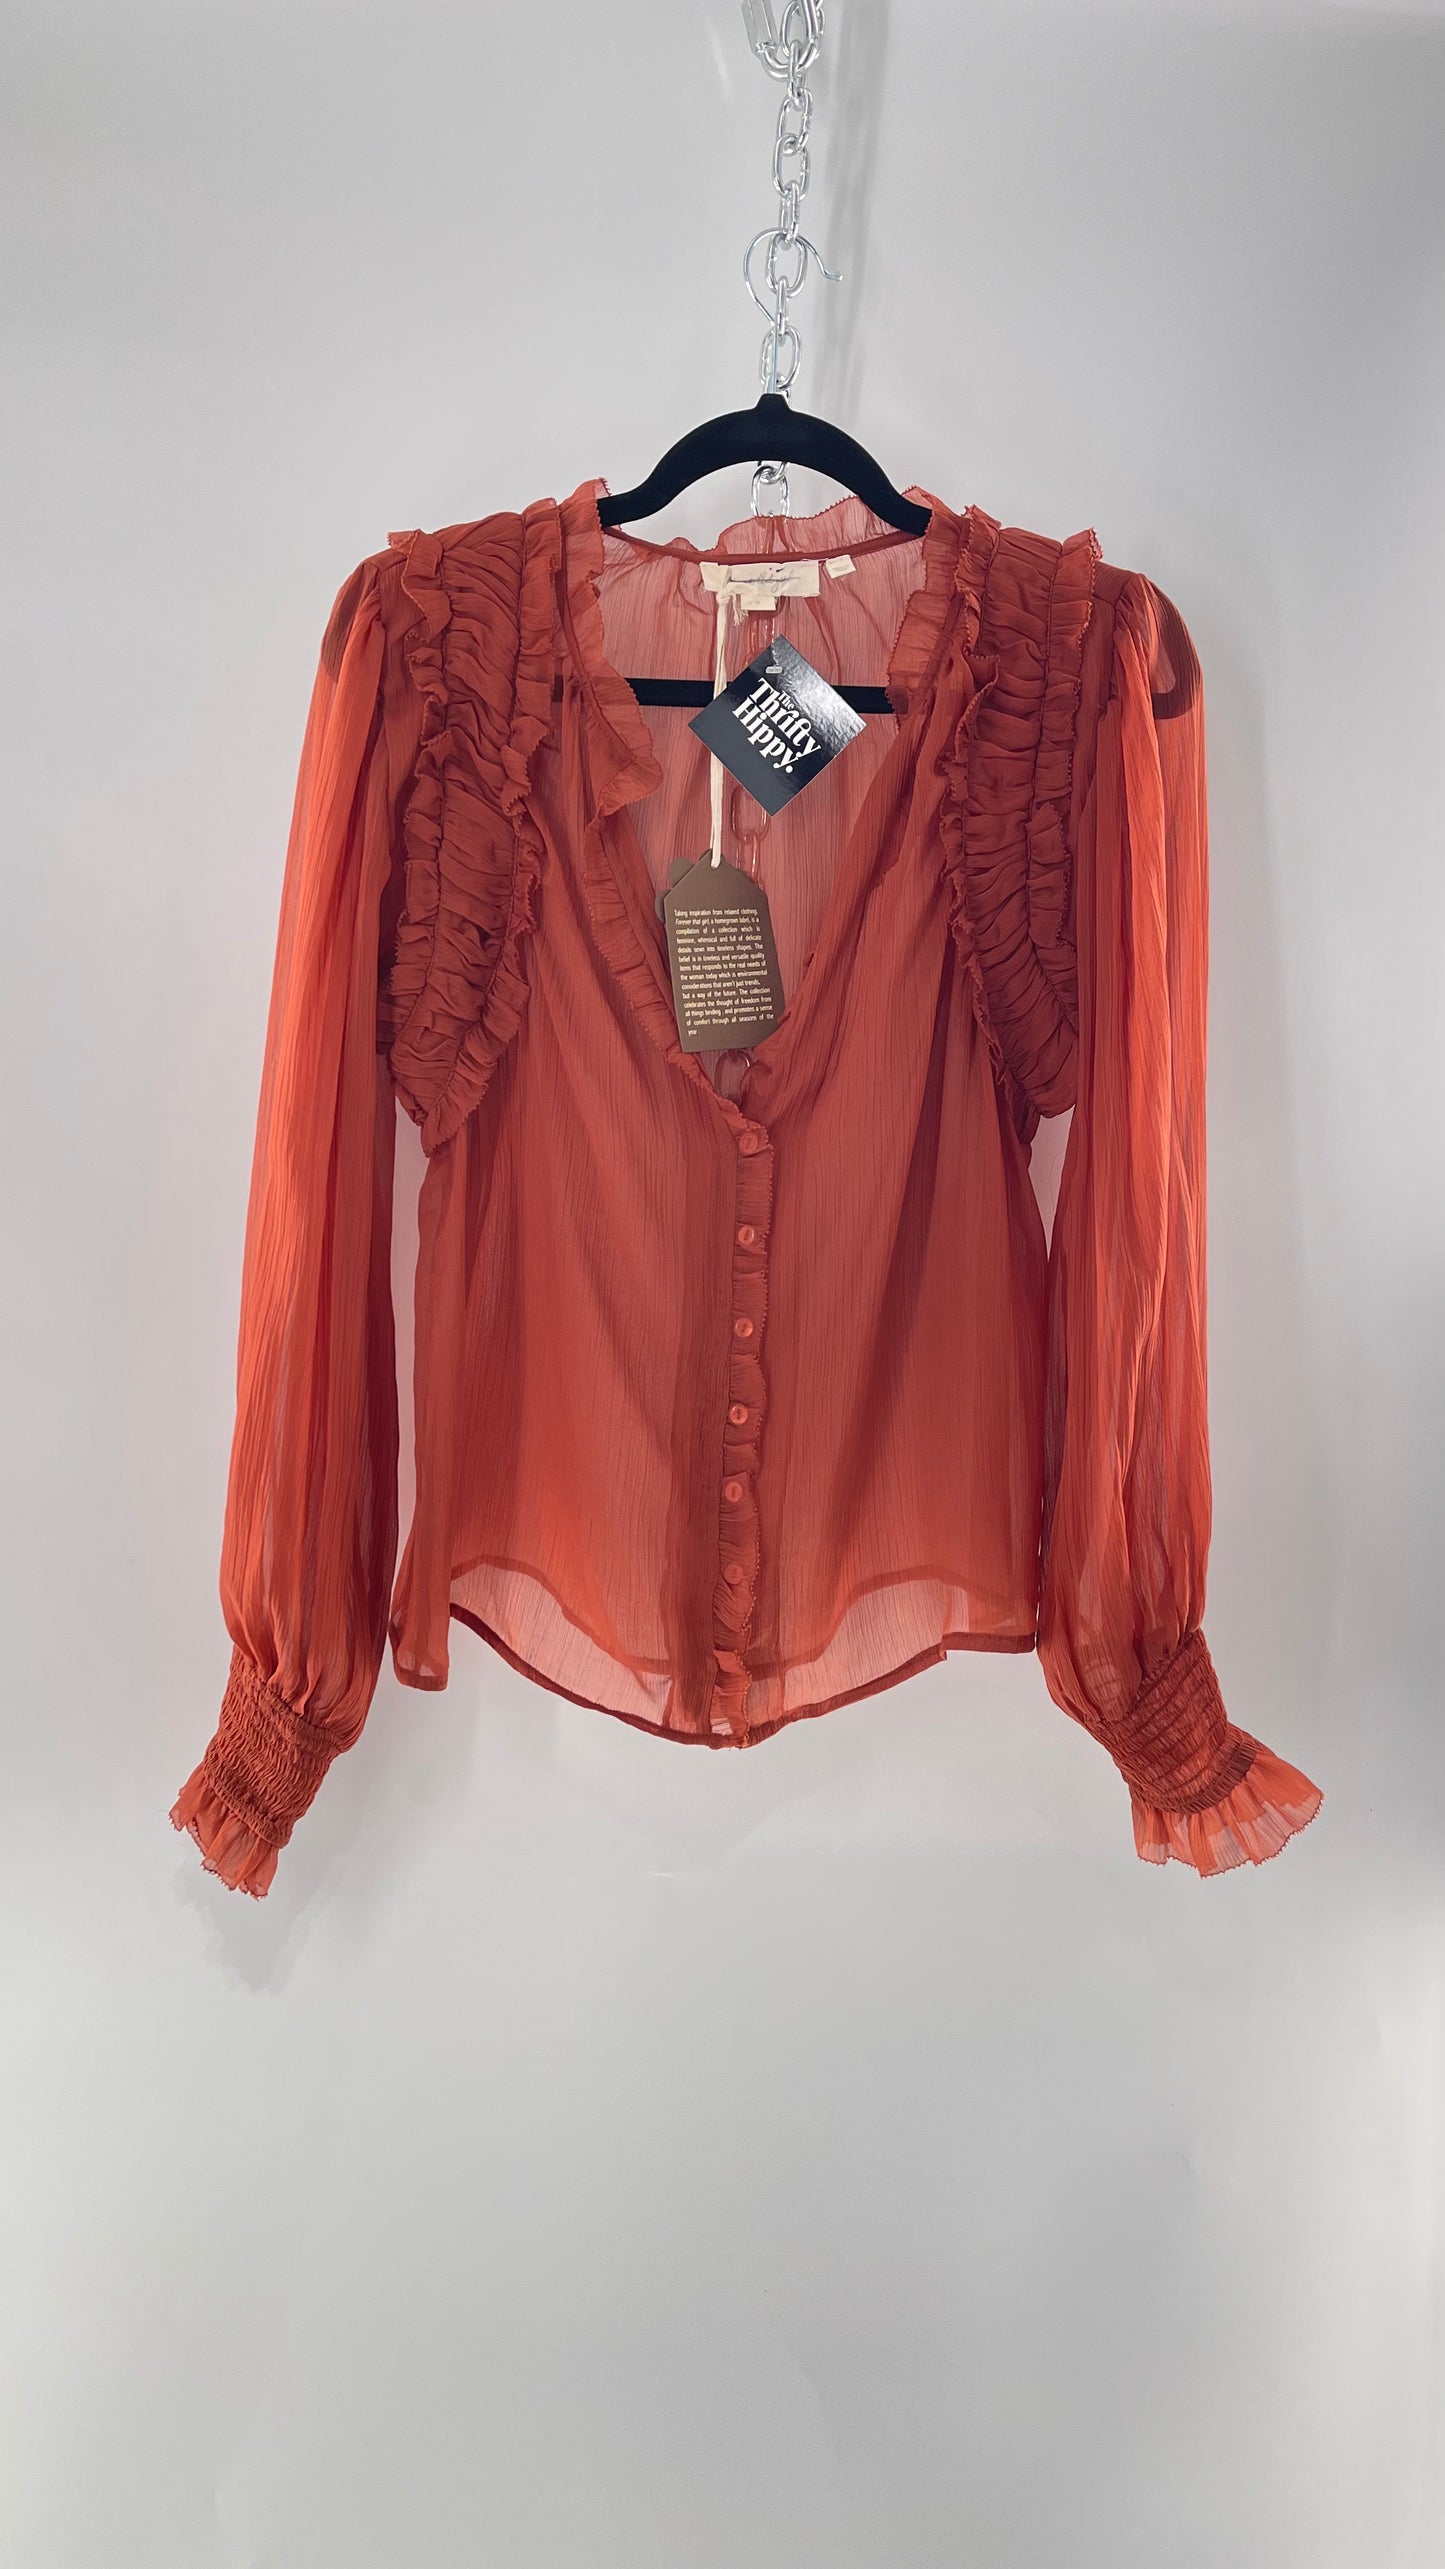 Forever That Girl Burnt Orange Shear Delicate Button Front Top with Pin Tuck Shoulder Detail and Balloon Smocked Sleeve (Medium)